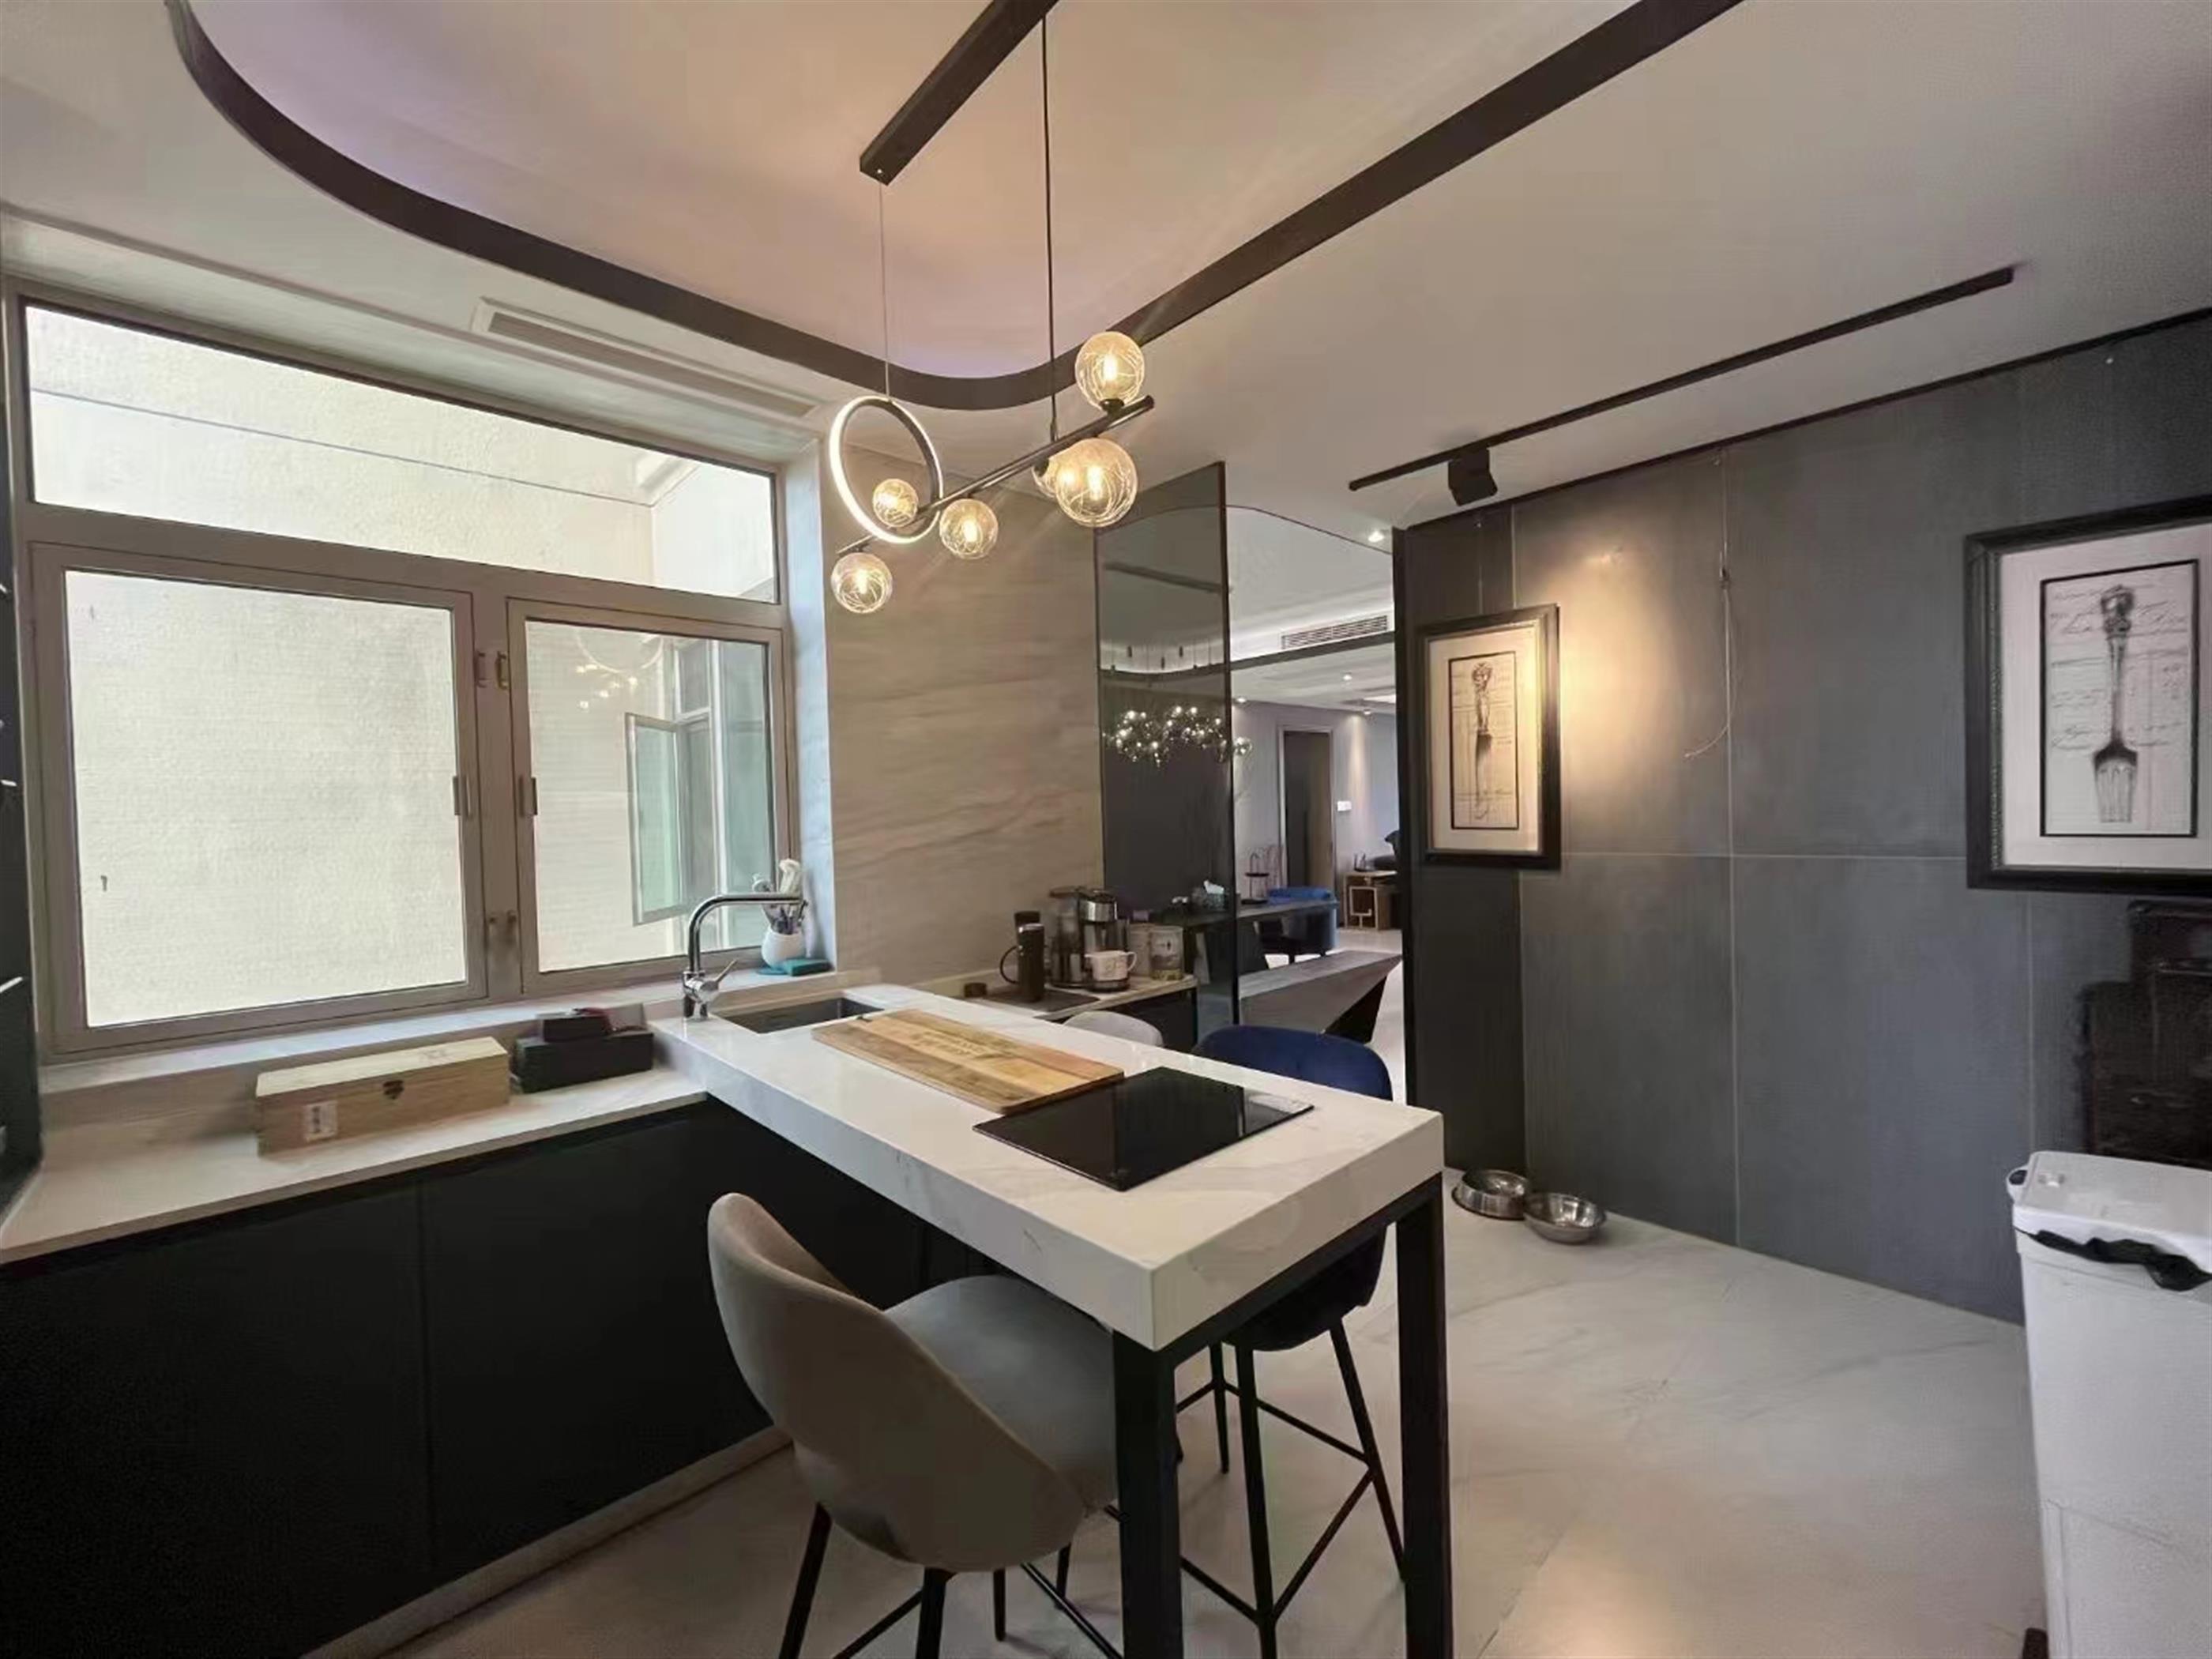 Open kitchen Space Classic Spacious Chic 3BR Apartment for Rent in Shanghai’s Jing’an Temple Neighborhood